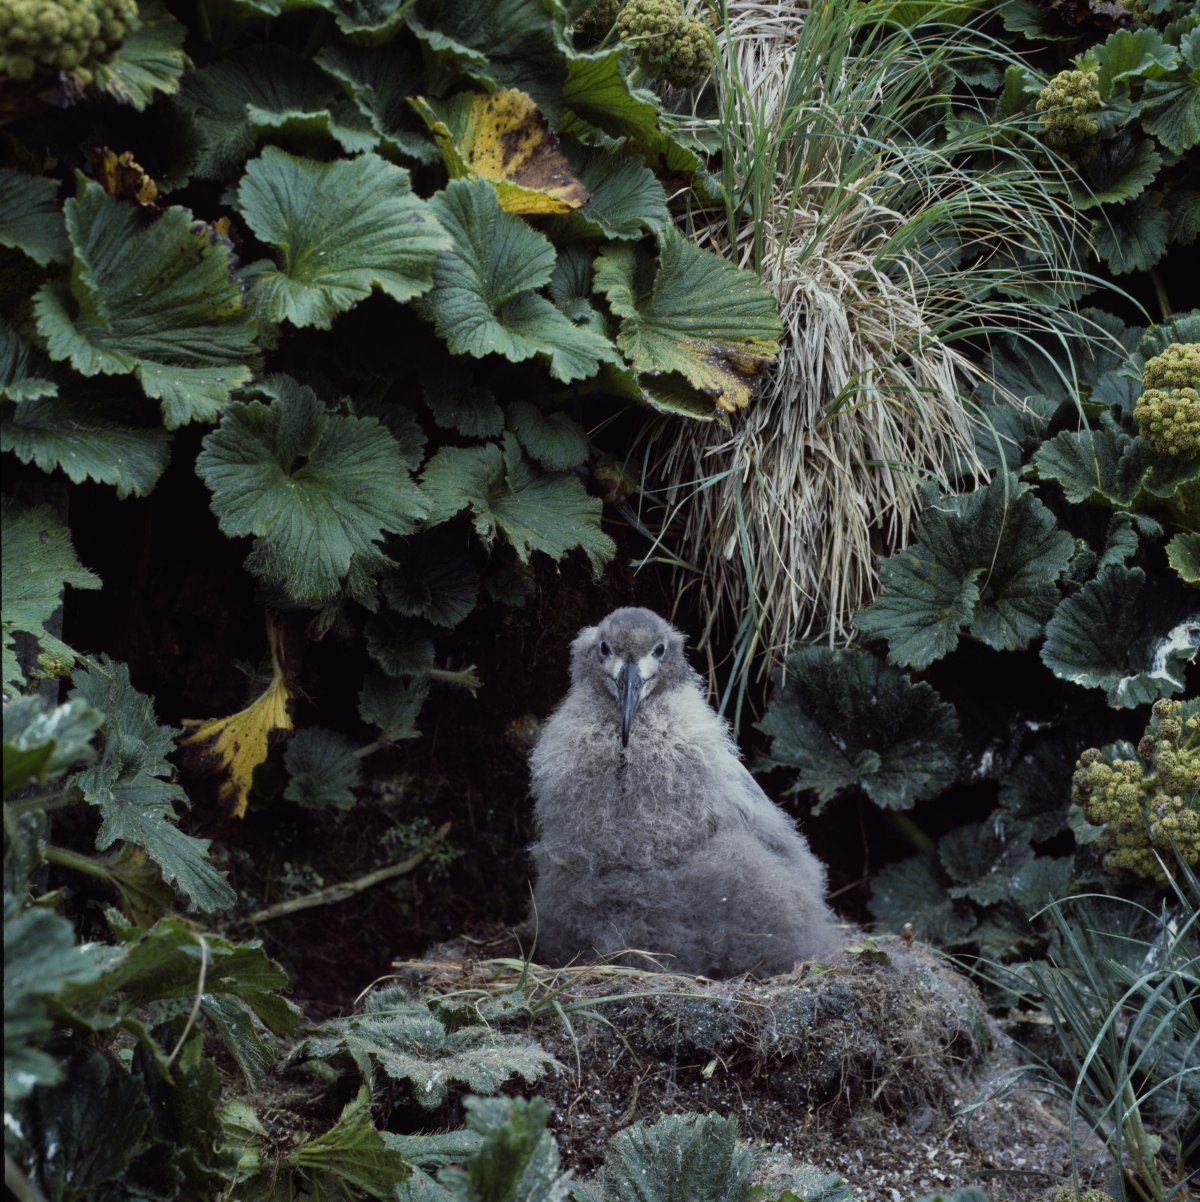 A fluffy grey chick sits on a nest among lush green leaves and grasses.